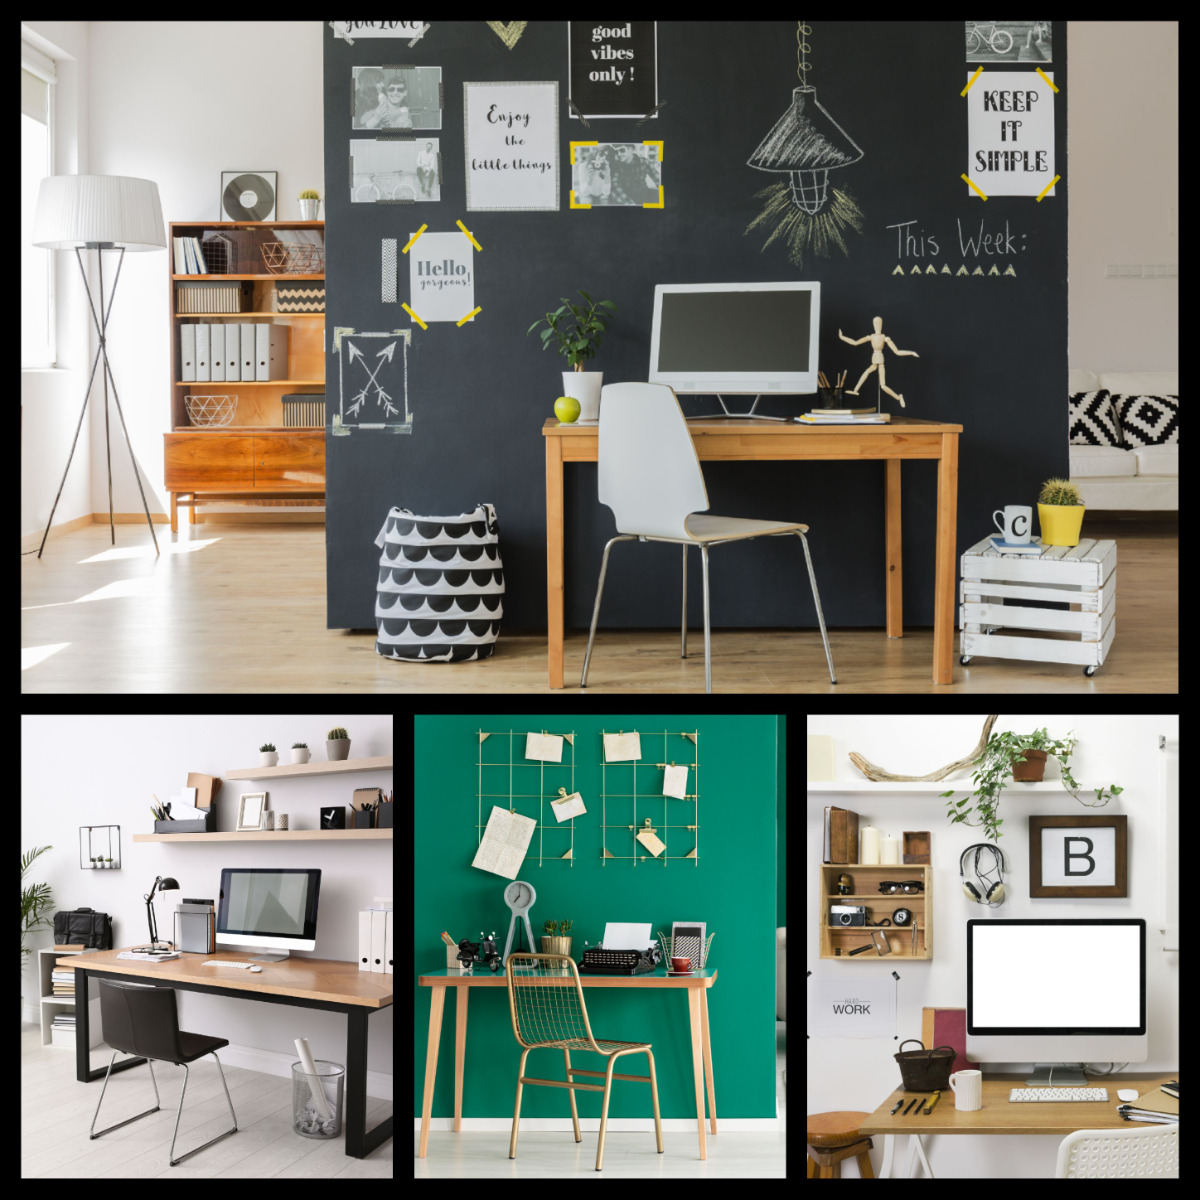 Home Office Inspiration: Organized, Efficient, and Creative